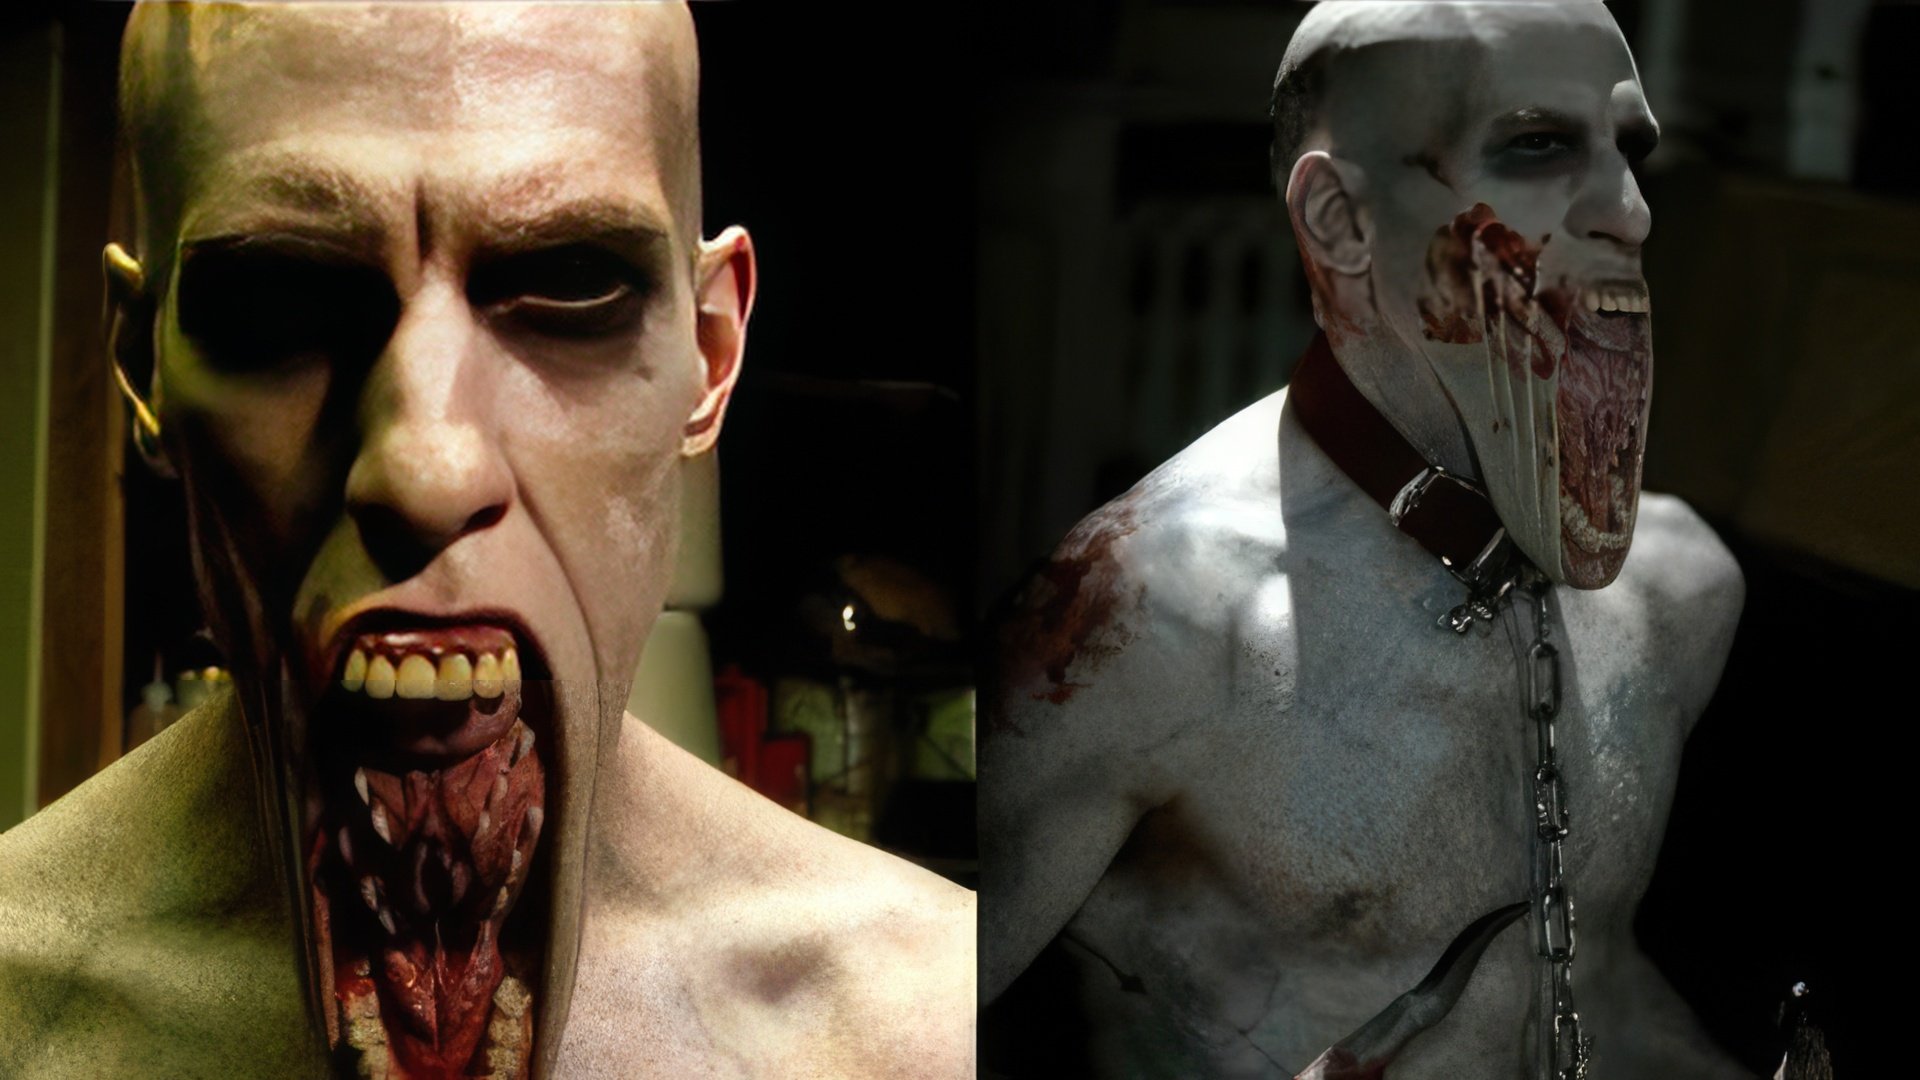 A vampire from 'The Strain'